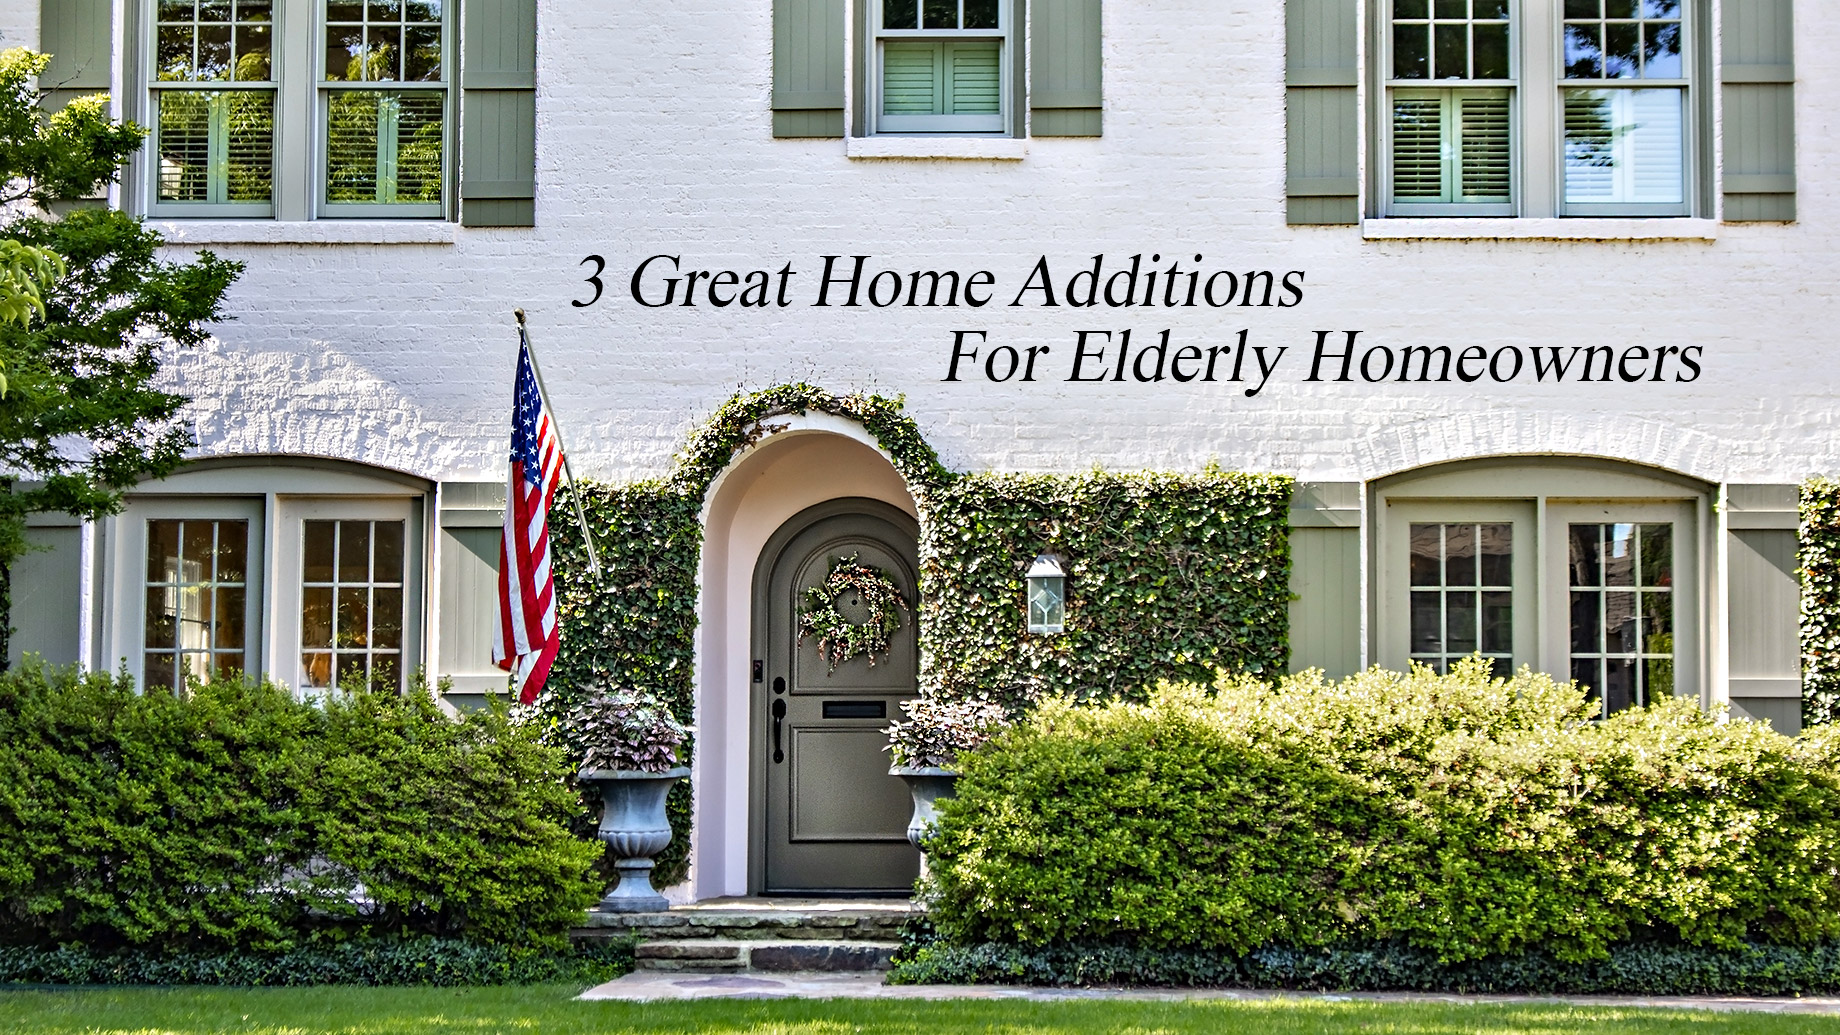 Better Retirement Ideas - 3 Great Home Additions For Elderly Homeowners